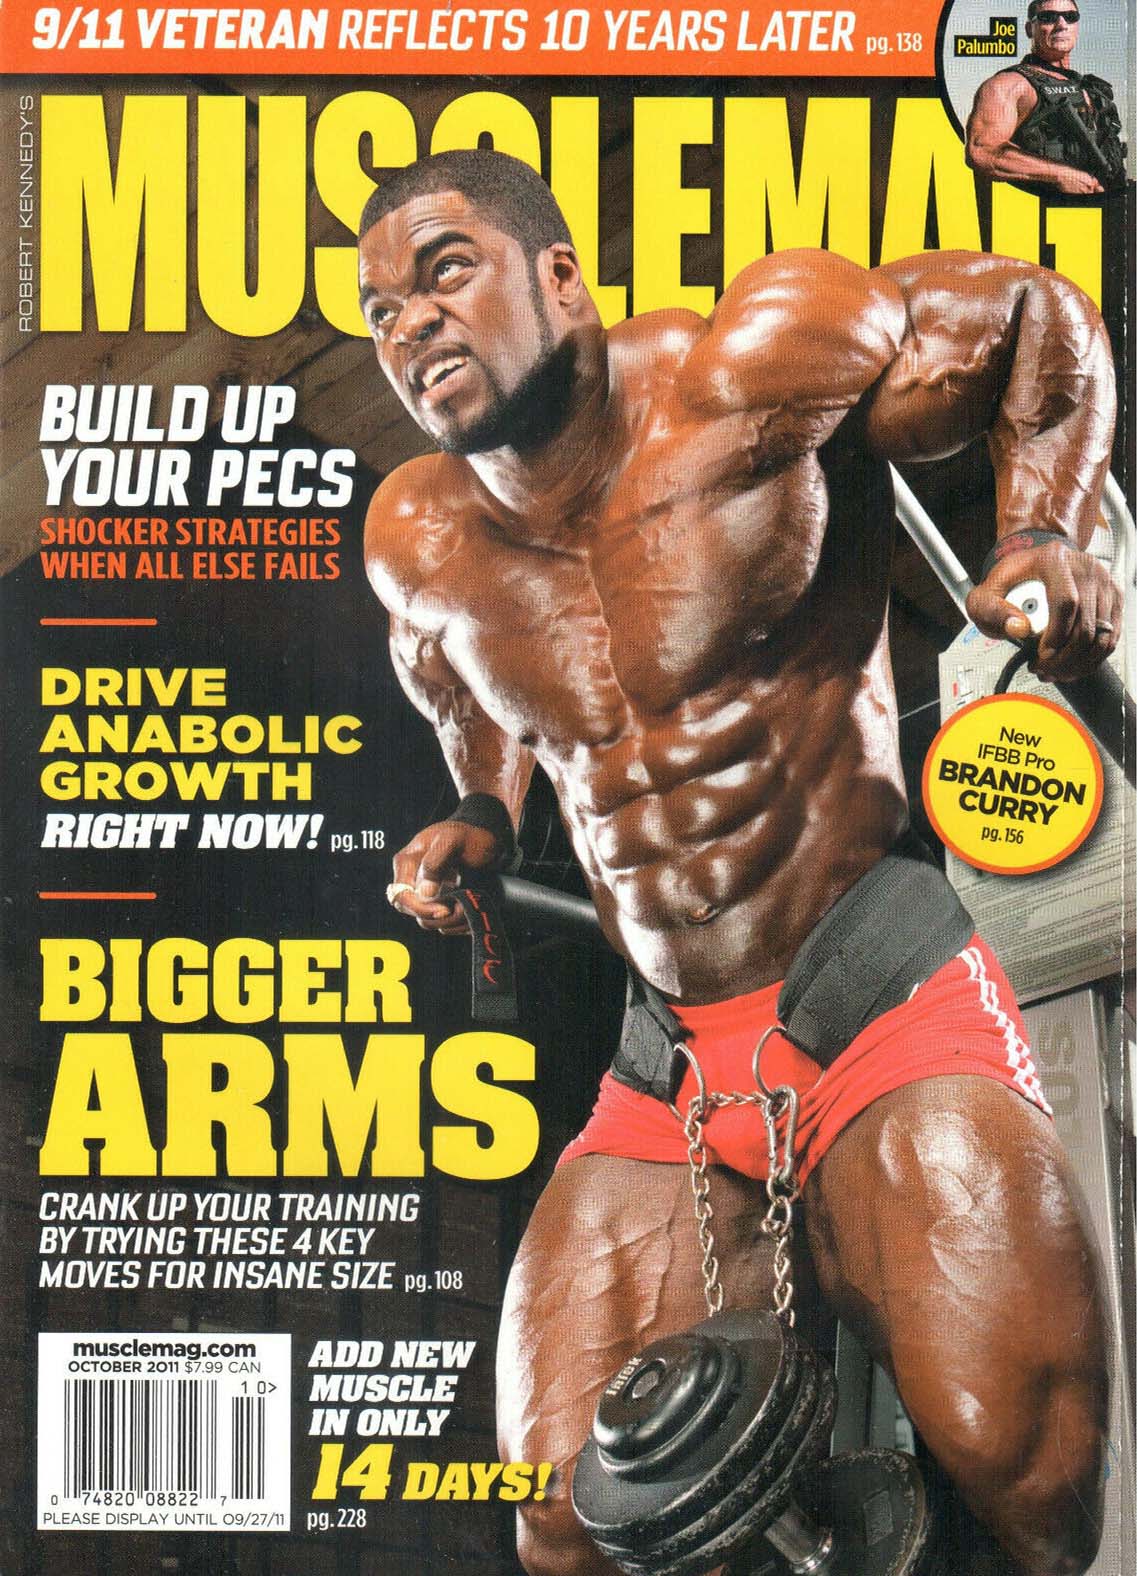 Muscle Mag October 2011 magazine back issue Muscle Mag magizine back copy Muscle Mag October 2011 Bodybuilding and Fitness Magazine Back Issue Published by Canadian Robert Kennedy and Founded in 1974. 9/11 Veteran Reflects 10 Years Later.